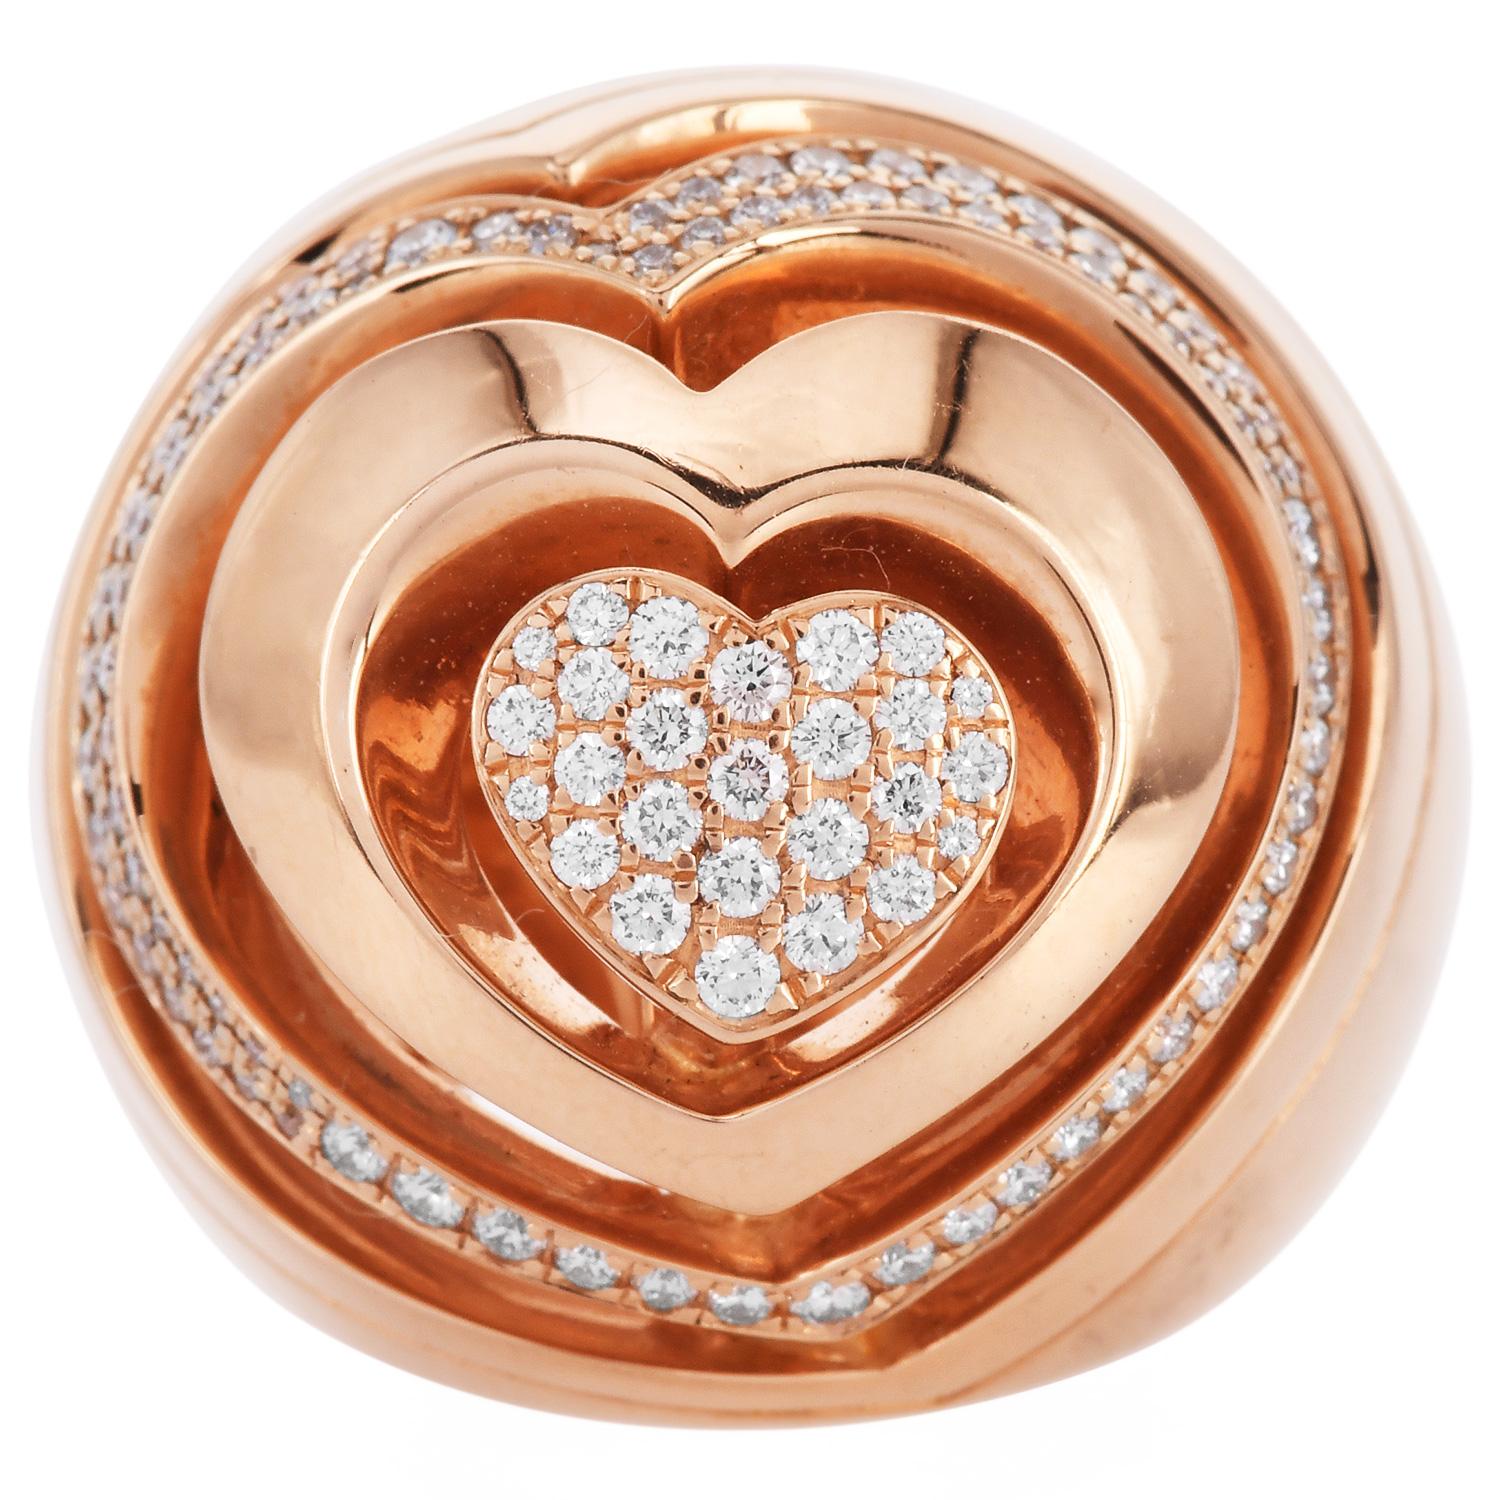 Estate Diamond 18K Gold Abstract Heart Dome Cocktail Ring forged in 18K rose gold with abstract heart illustration dome statement ring with natural Pave diamonds.

The diamonds are approx. 1.30  carats, E-F color and VS1-VS2 clarity

Marked: